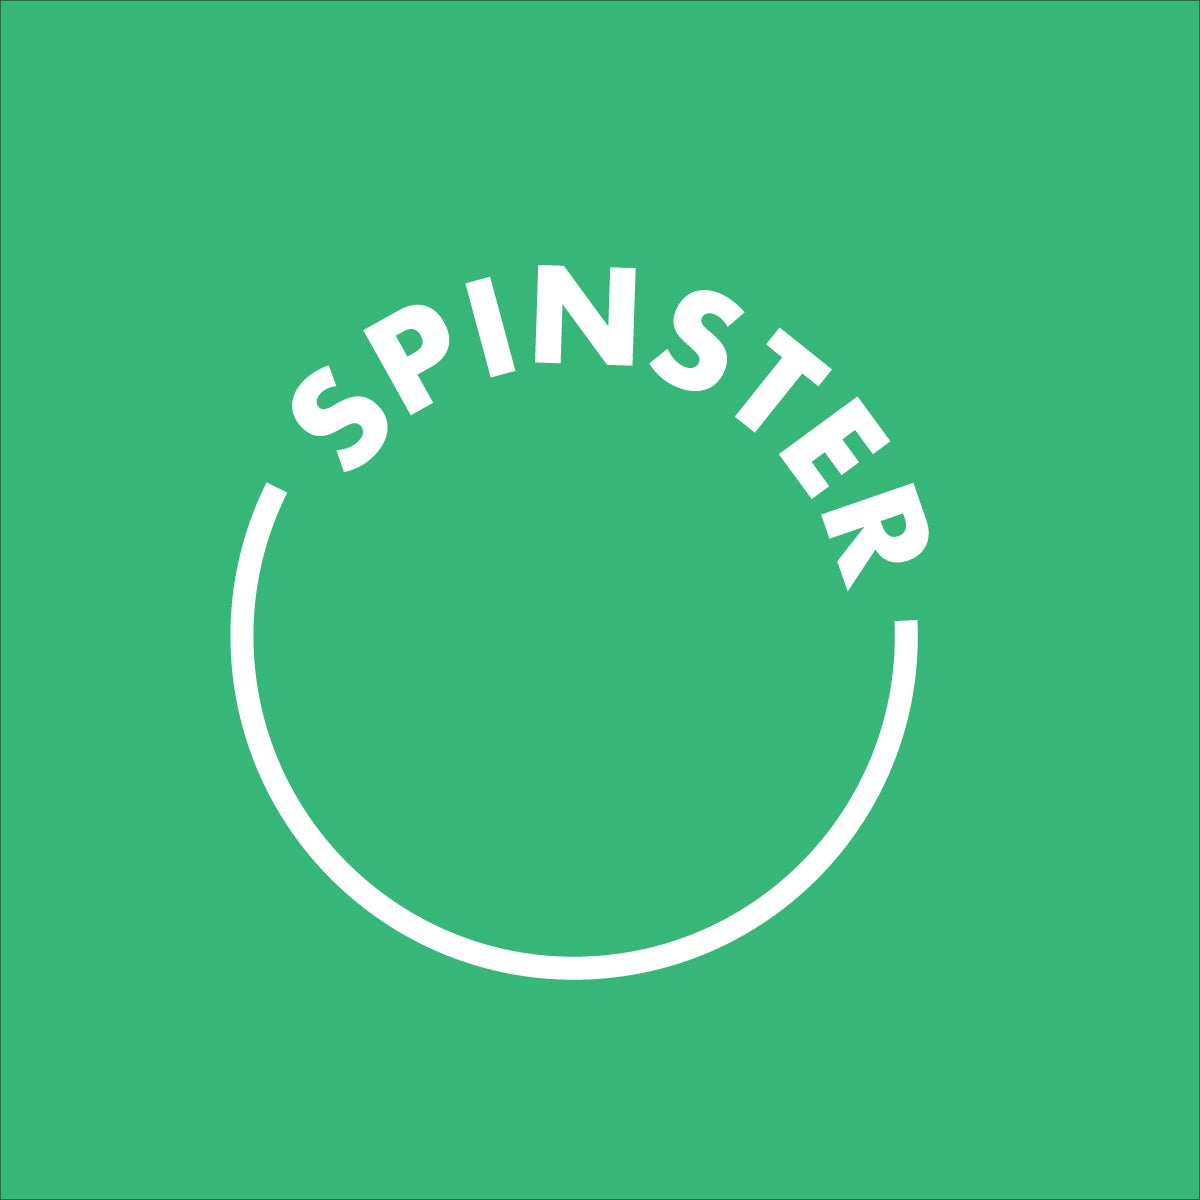 What's a spinster, really?